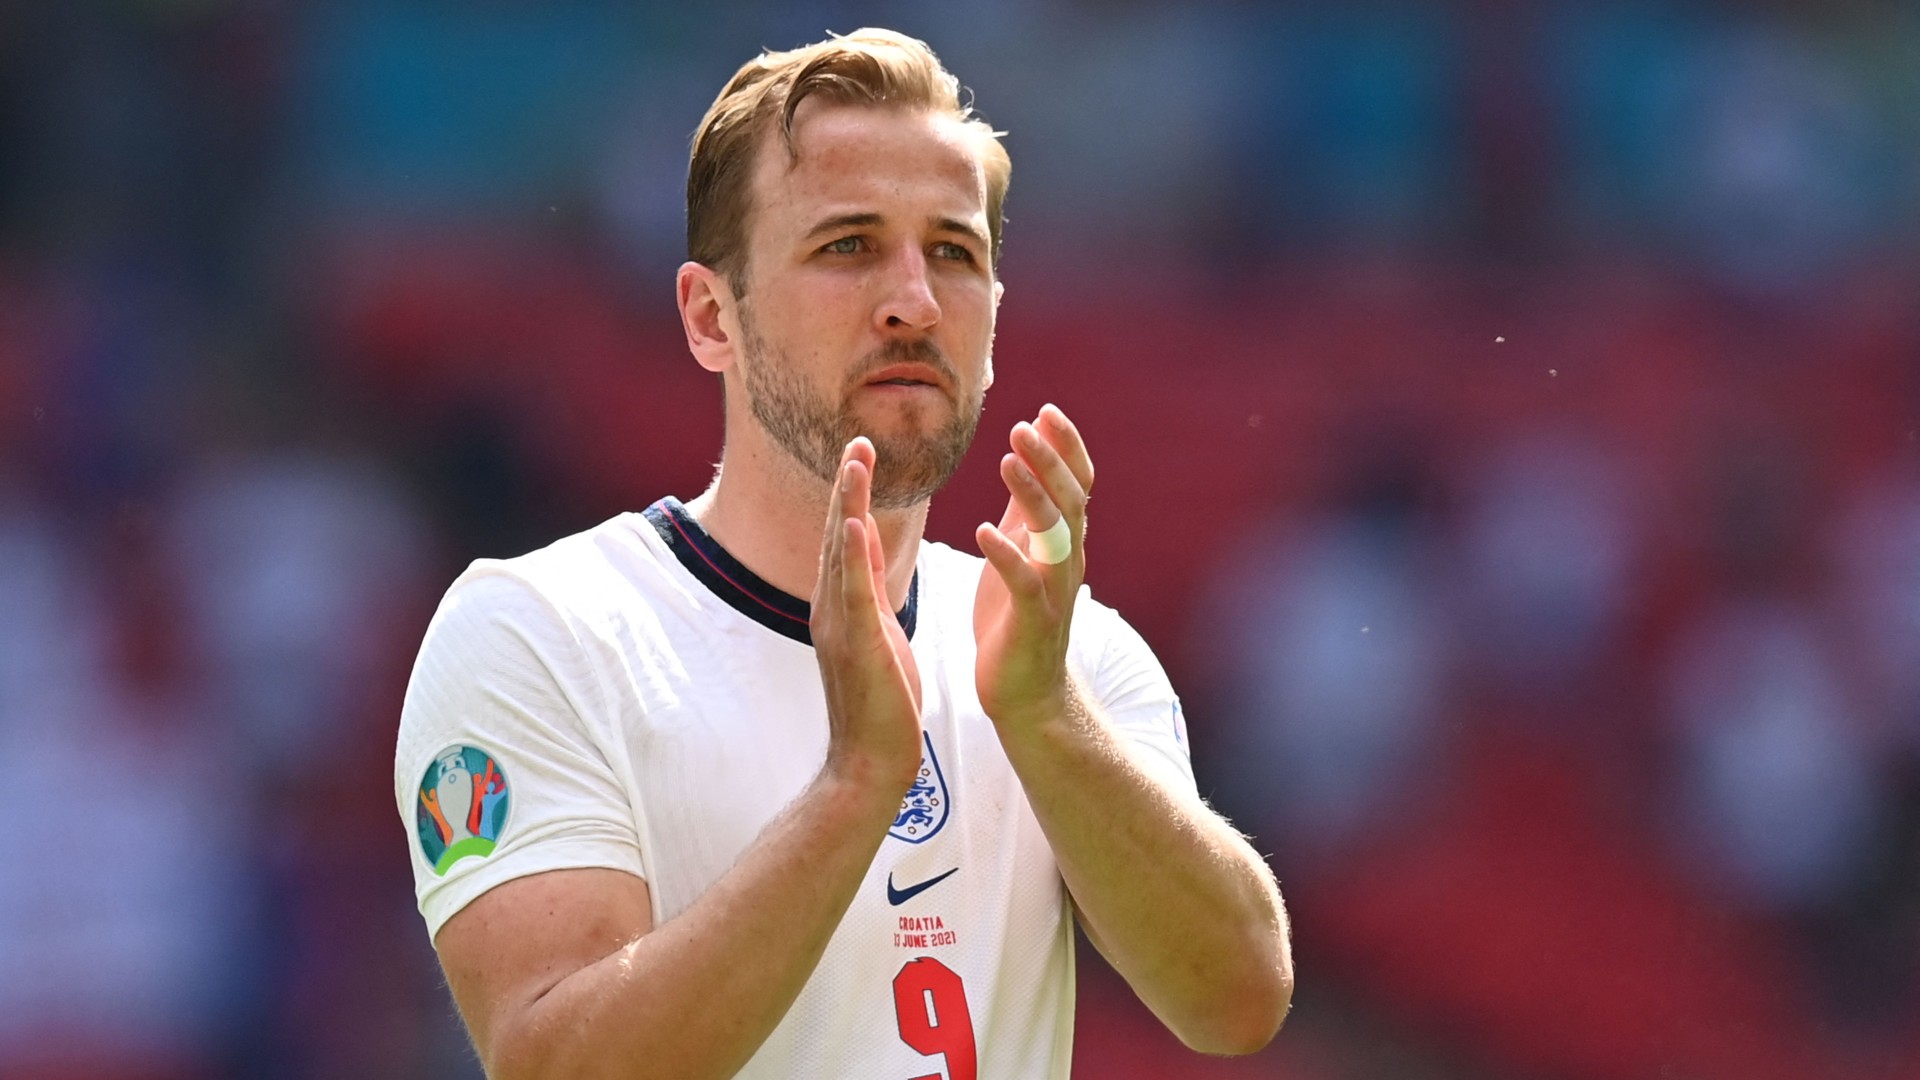 England captain Kane almost signed for Union Berlin, claims former head coach Schafer